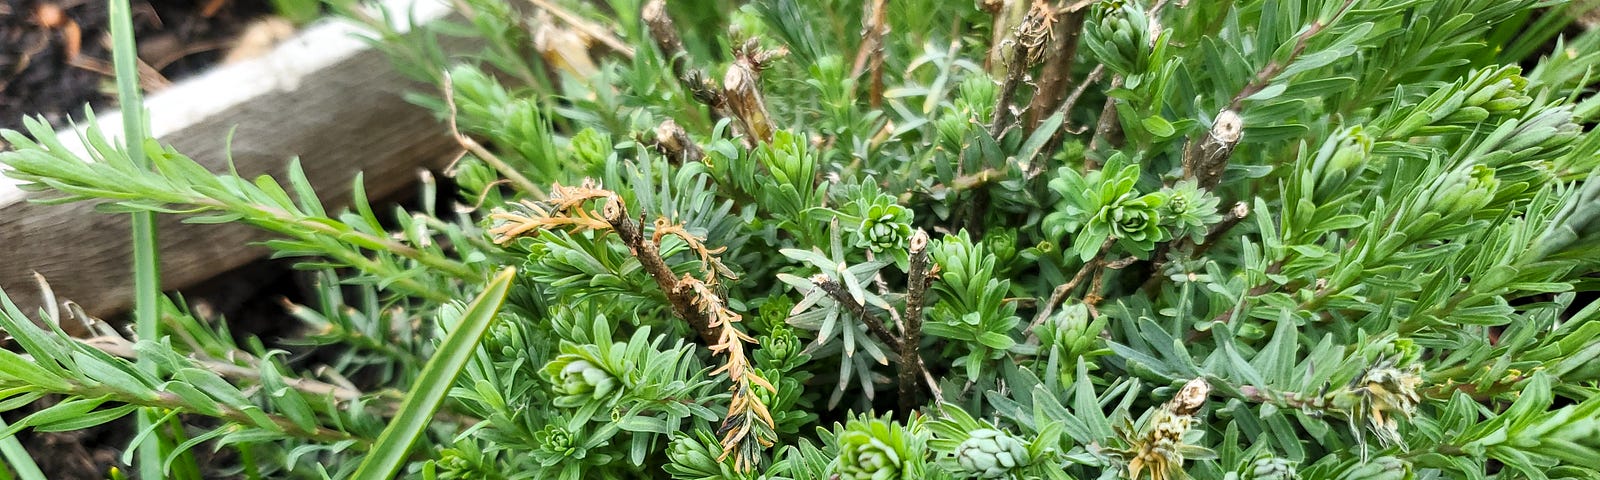 A variety of green plants are growing densely in a garden bed with rich soil visible in the background. Close-up, the photo showcases the intricate shapes and variety of the foliage, with some plants having needle-like leaves while others are more broad and flat.